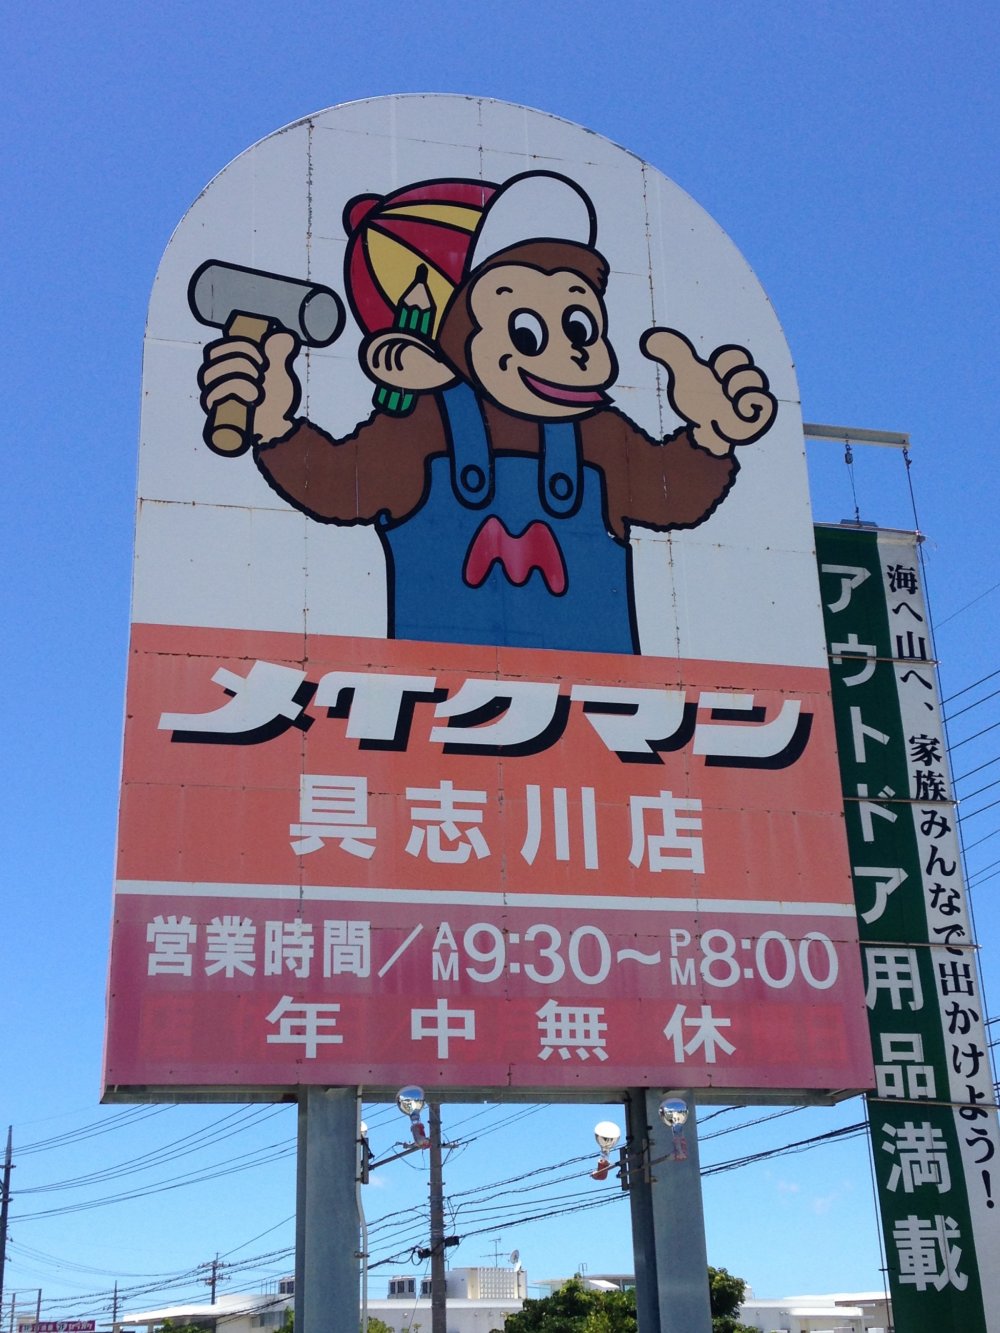 Make Man can easily be identified by the hammer-wielding monkey on its sign